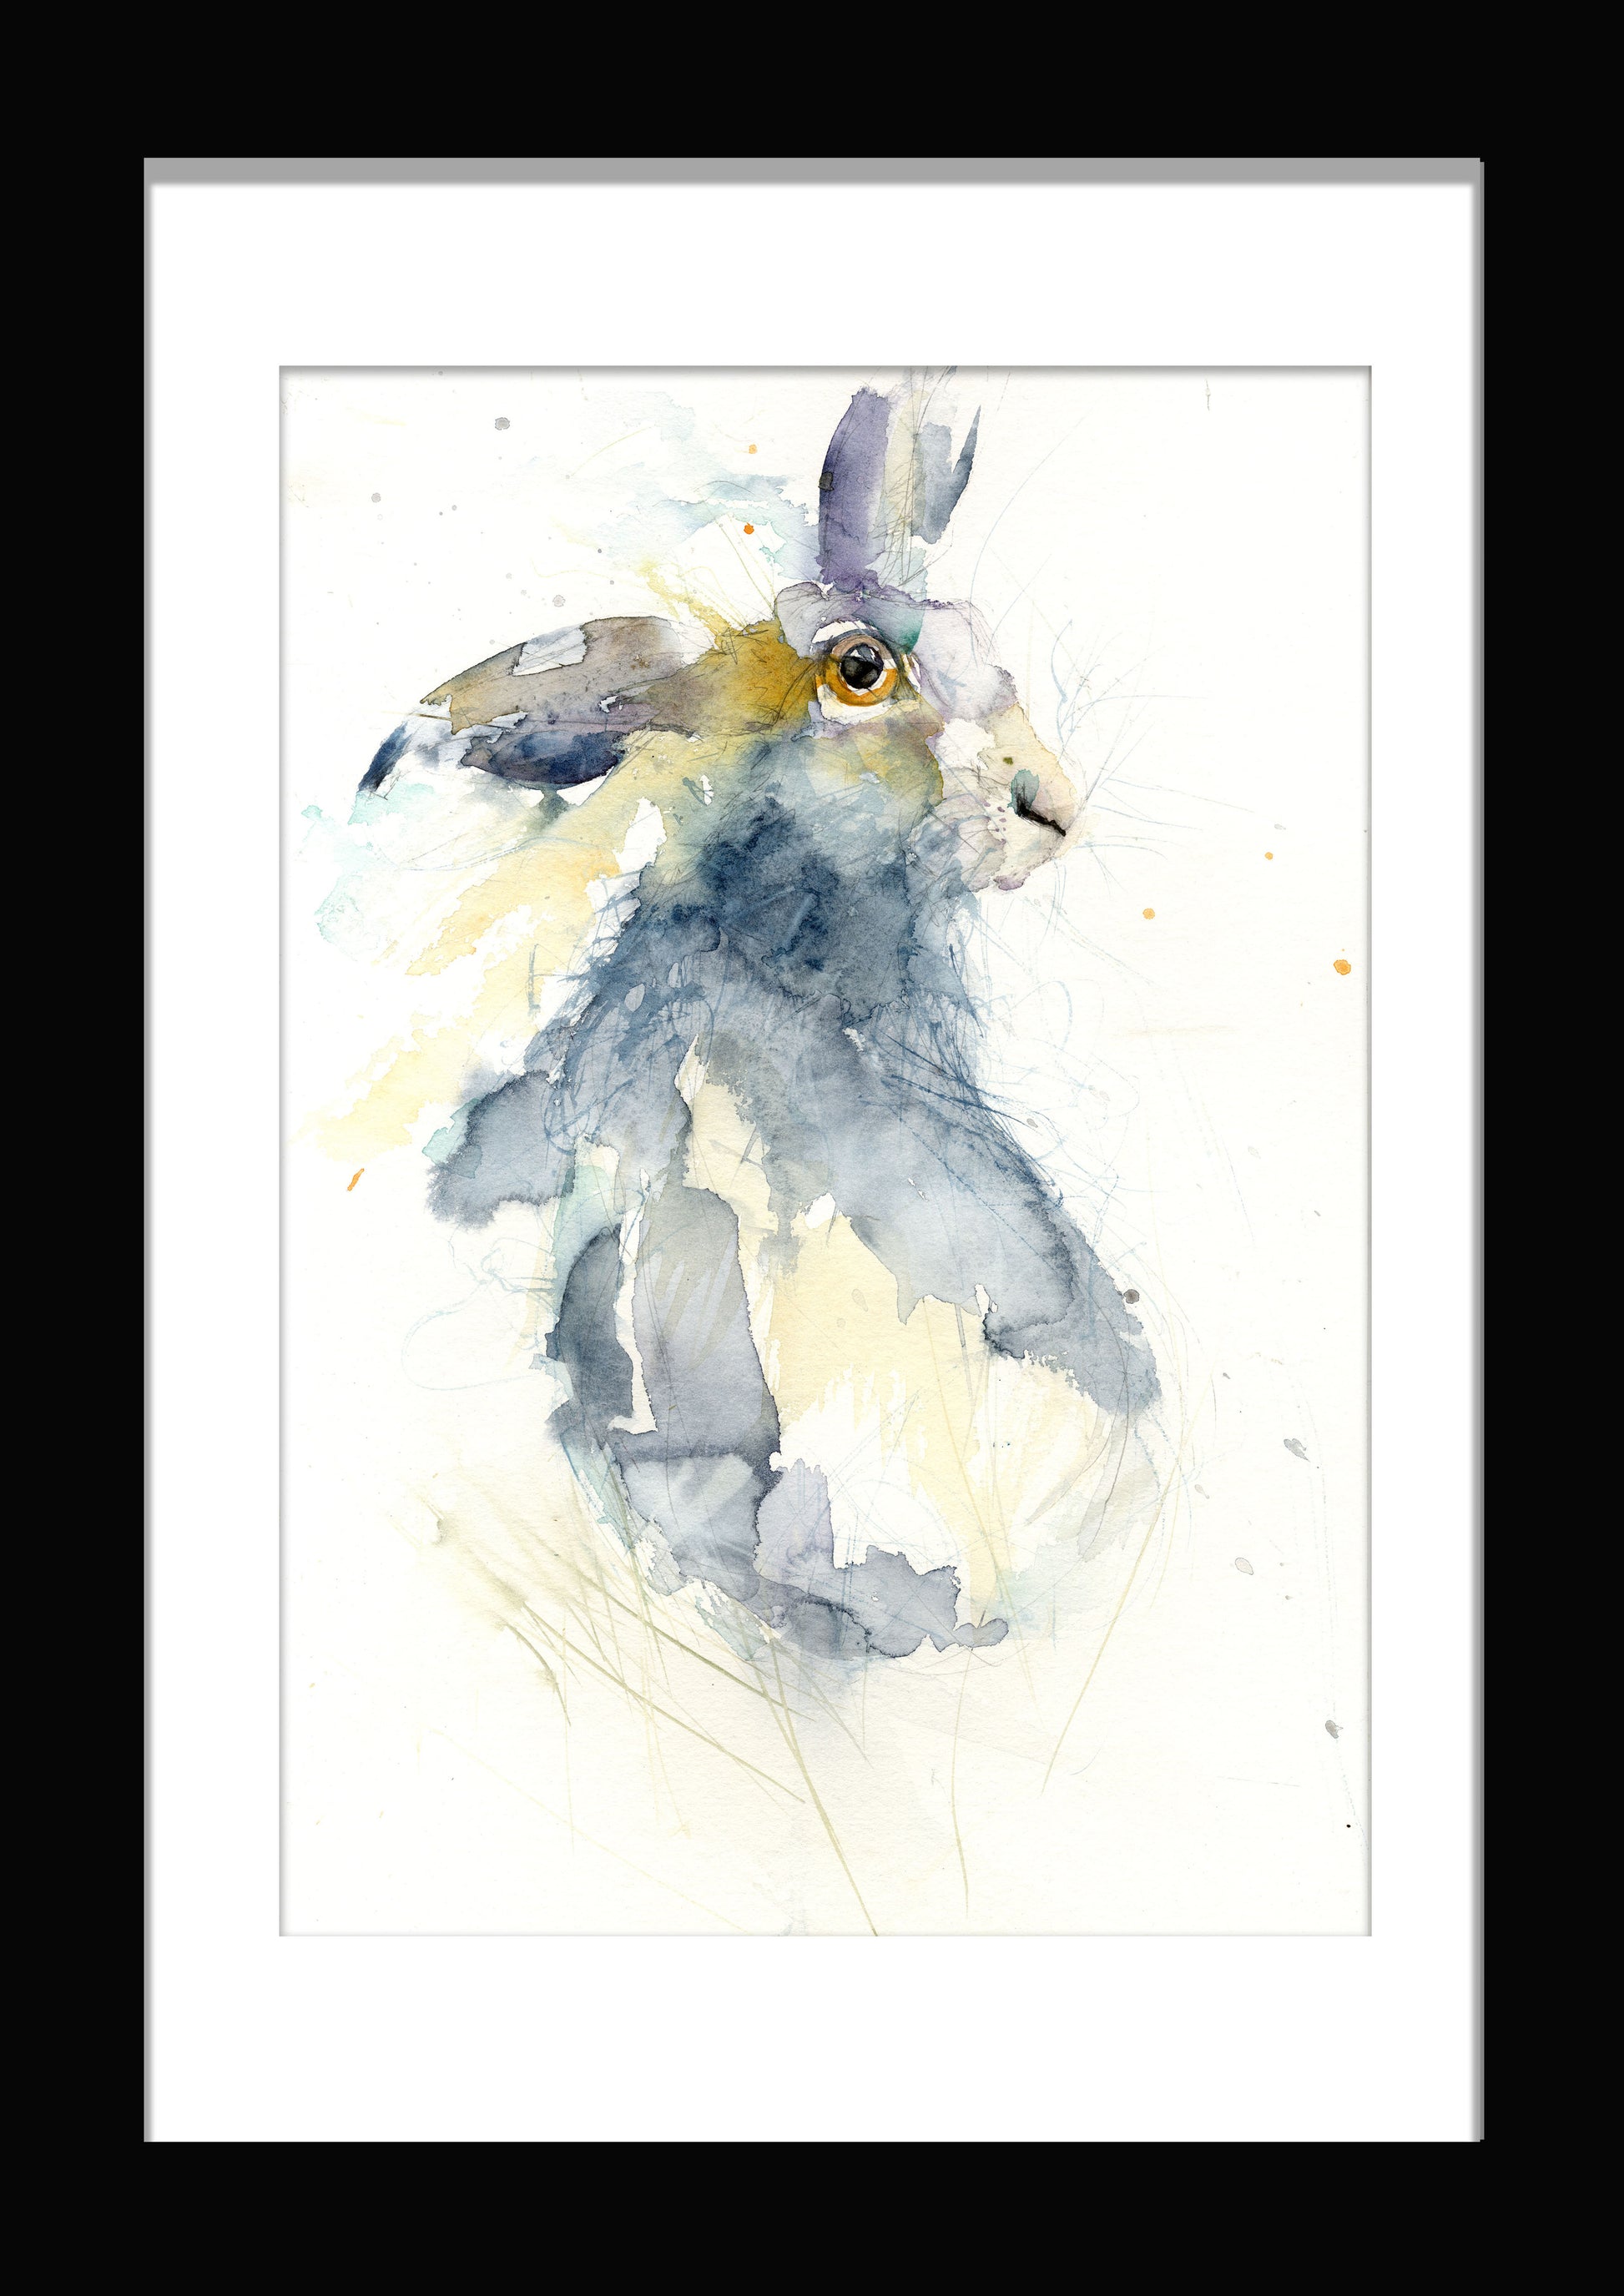 Limited edition print "Hare looking over shoulder" - Jen Buckley Art limited edition animal art prints